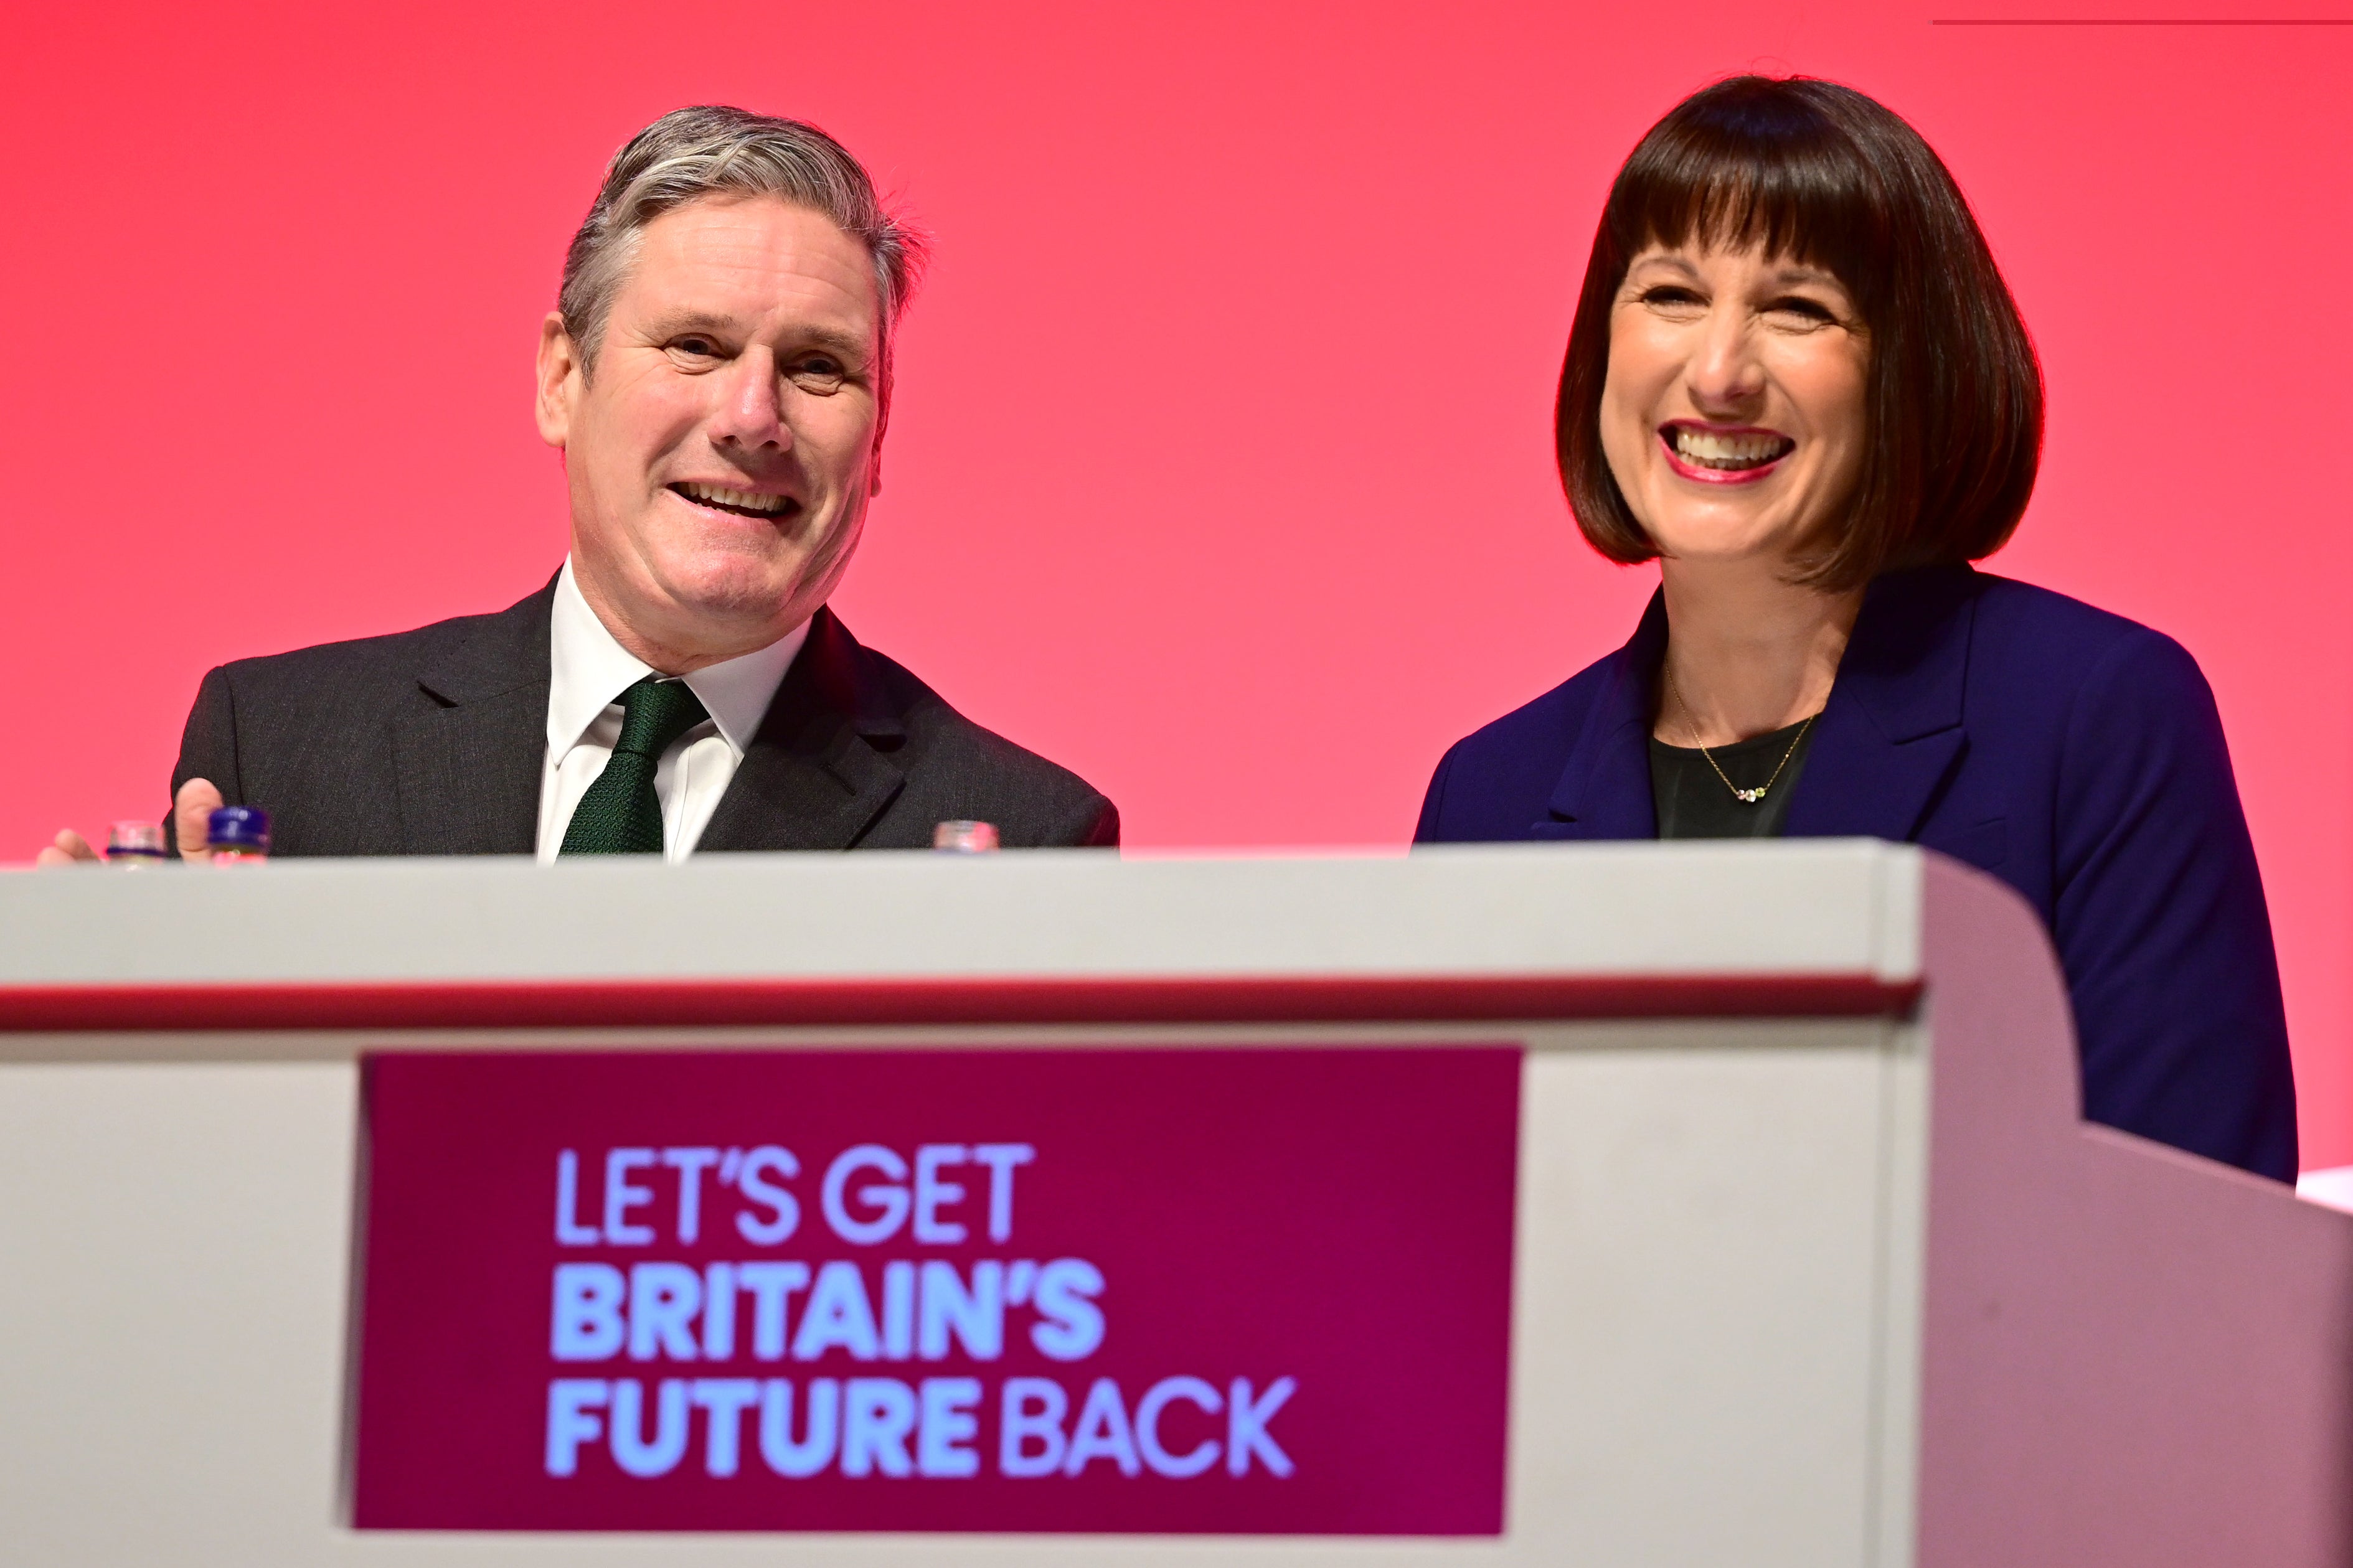 Keir Starmer and shadow chancellor Rachel Reeves will be punished by voters for their weakness, one pollster suggests